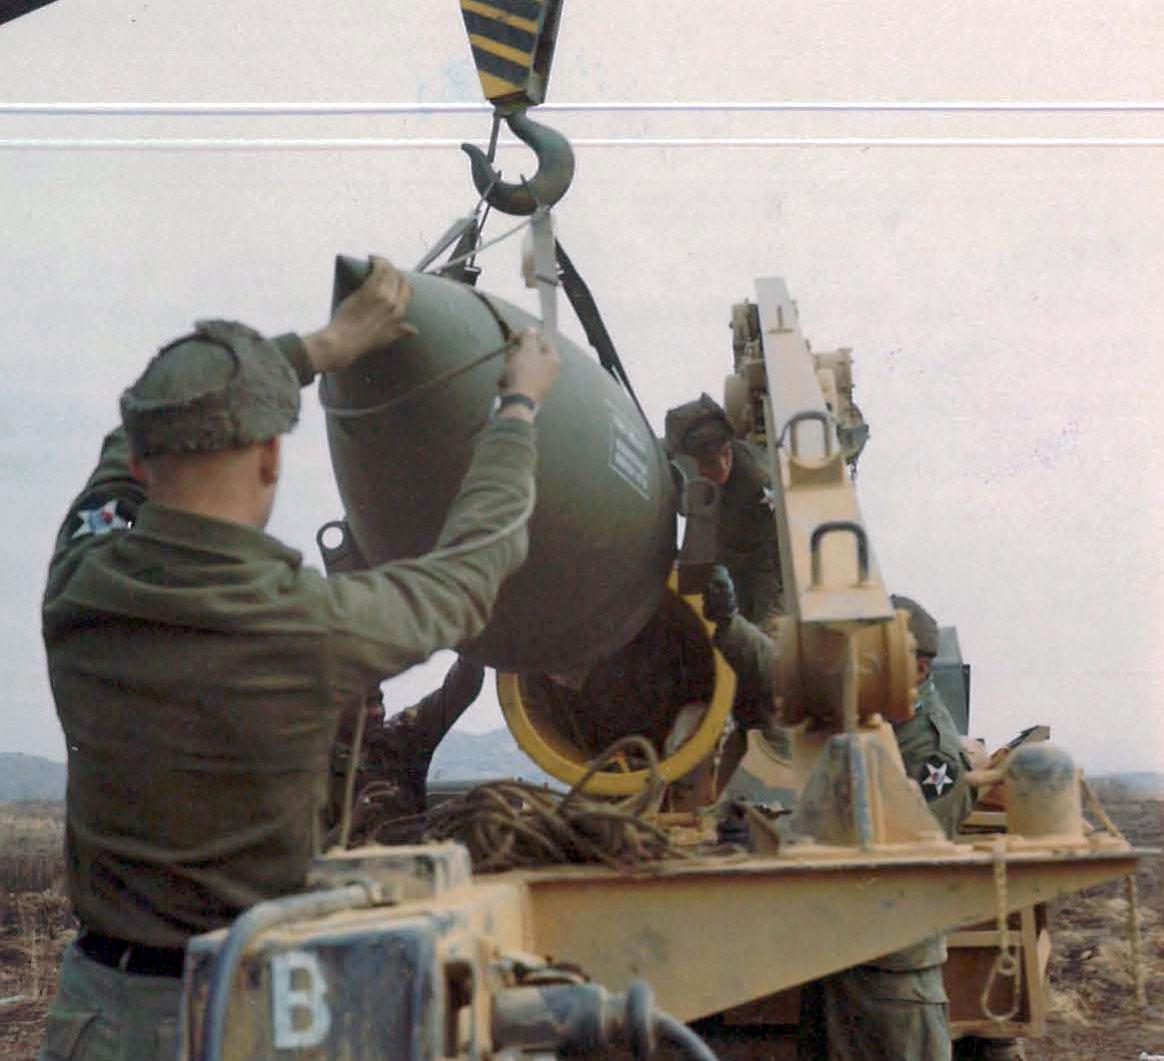 Members of the Headquarters Battery, 1st Battalion, 12th Artillery, 2nd Infantry Division hoisting the warhead section